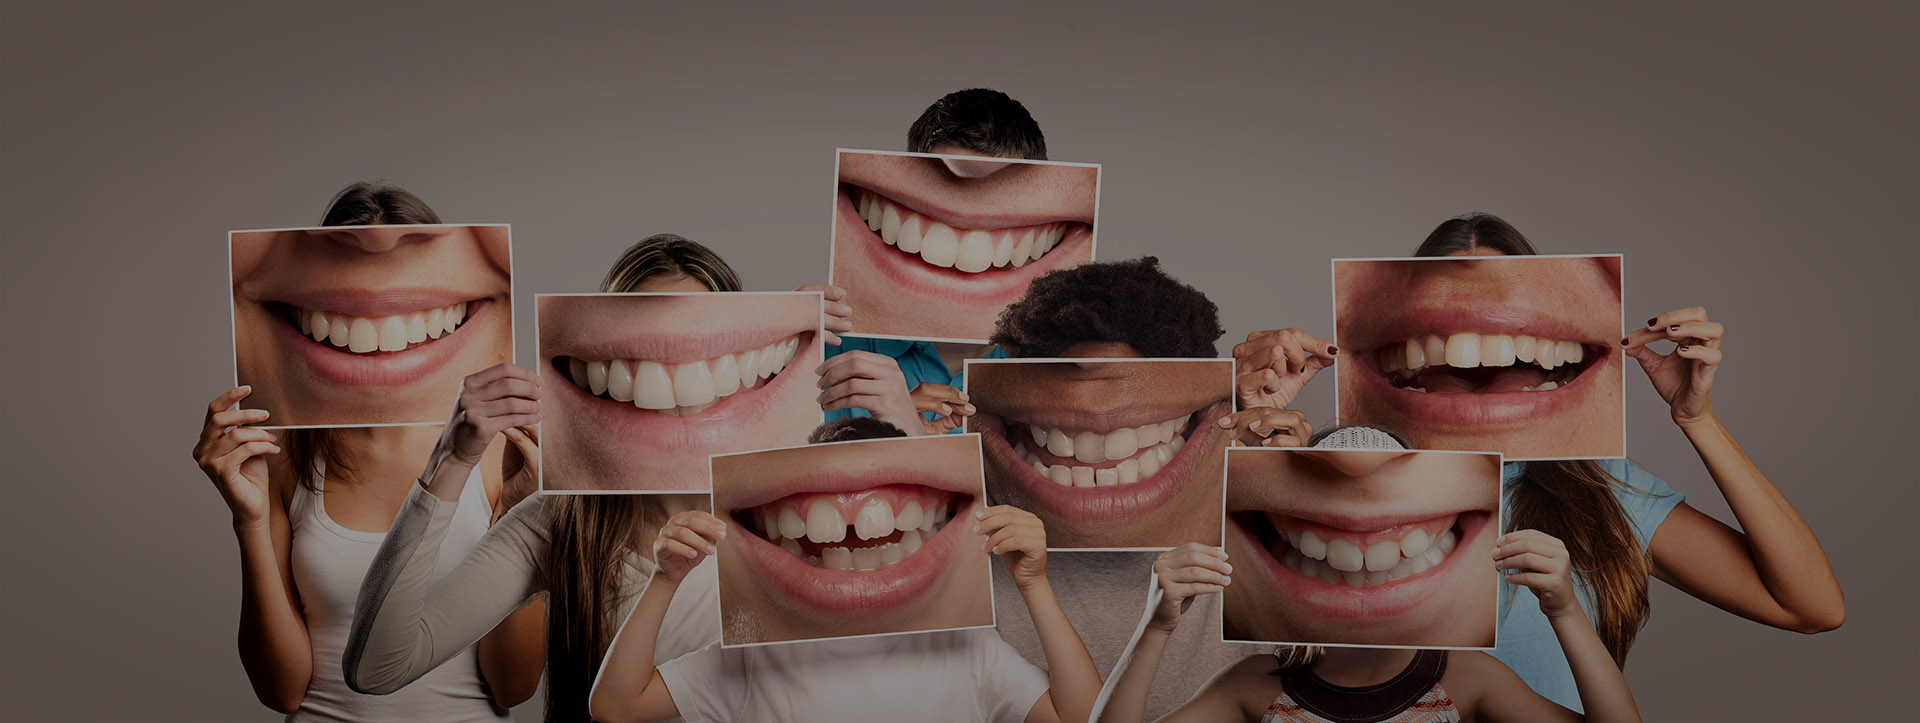 AdobeStock 377376885 1 - Benefits of Orthodontic Treatment on Overall Health and Well-Being